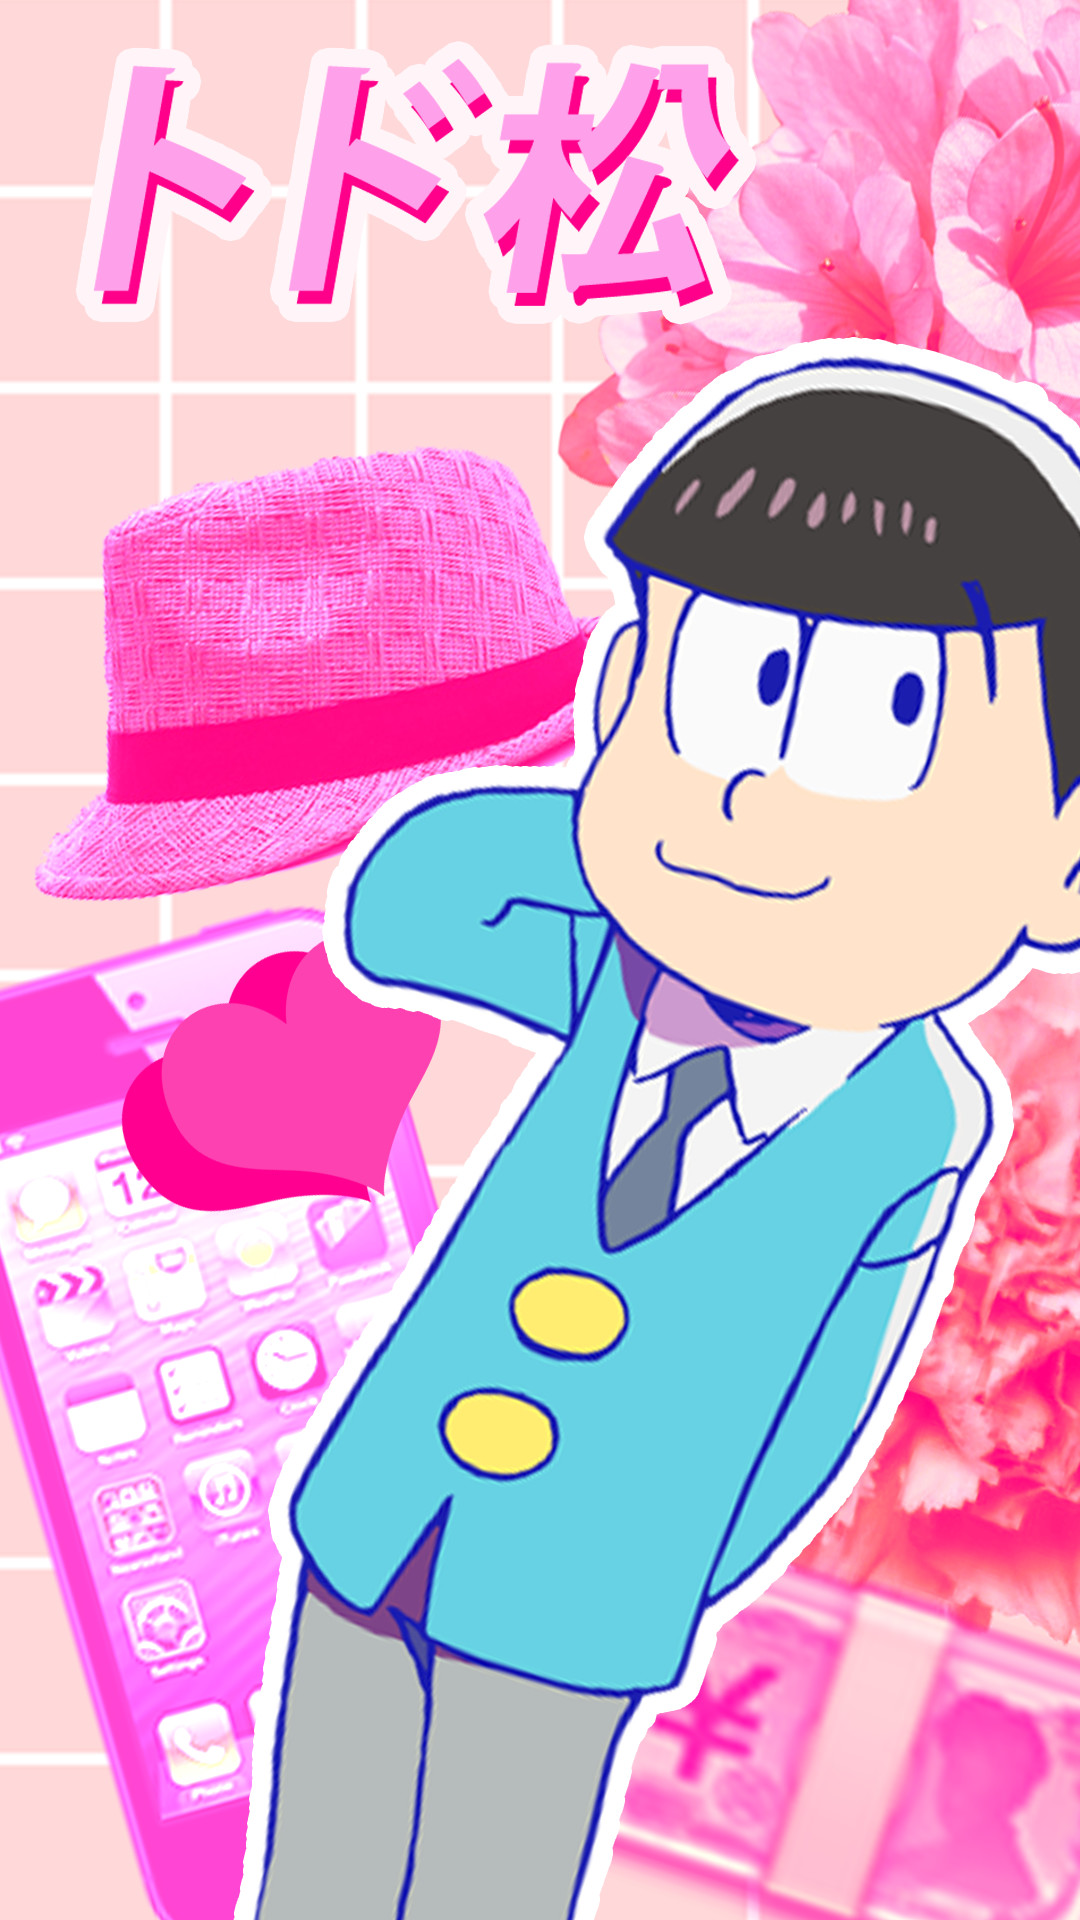 a Dog Will Lick His Butt But Won't Eat a Pickle | hey hey here's the 2nd  version of the osomatsu.